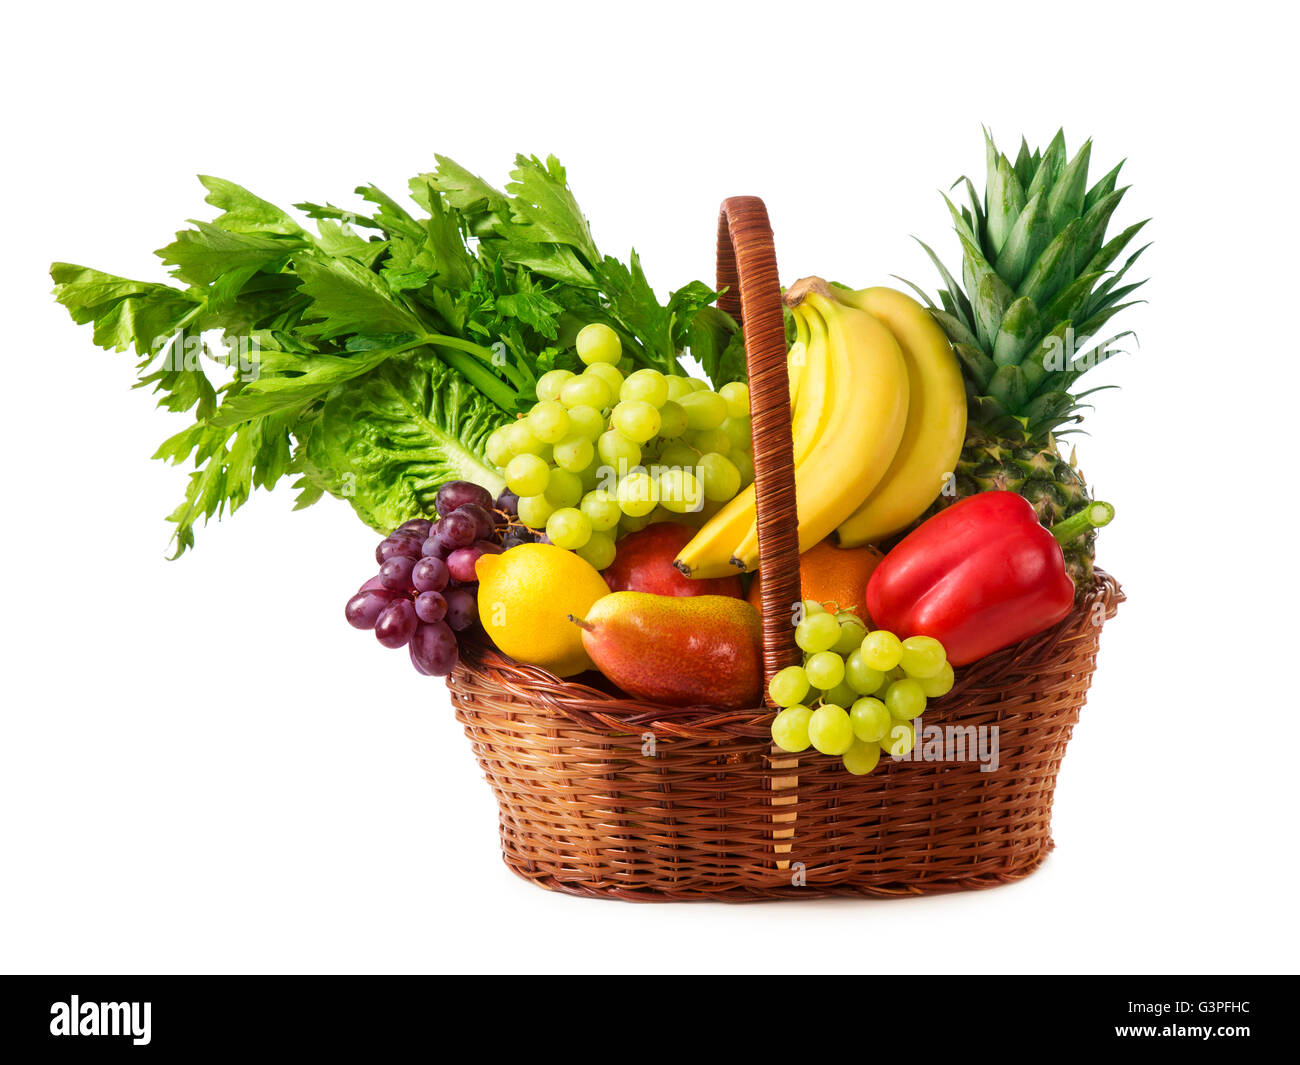 Vegetables and fruits isolated on a white background Stock Photo